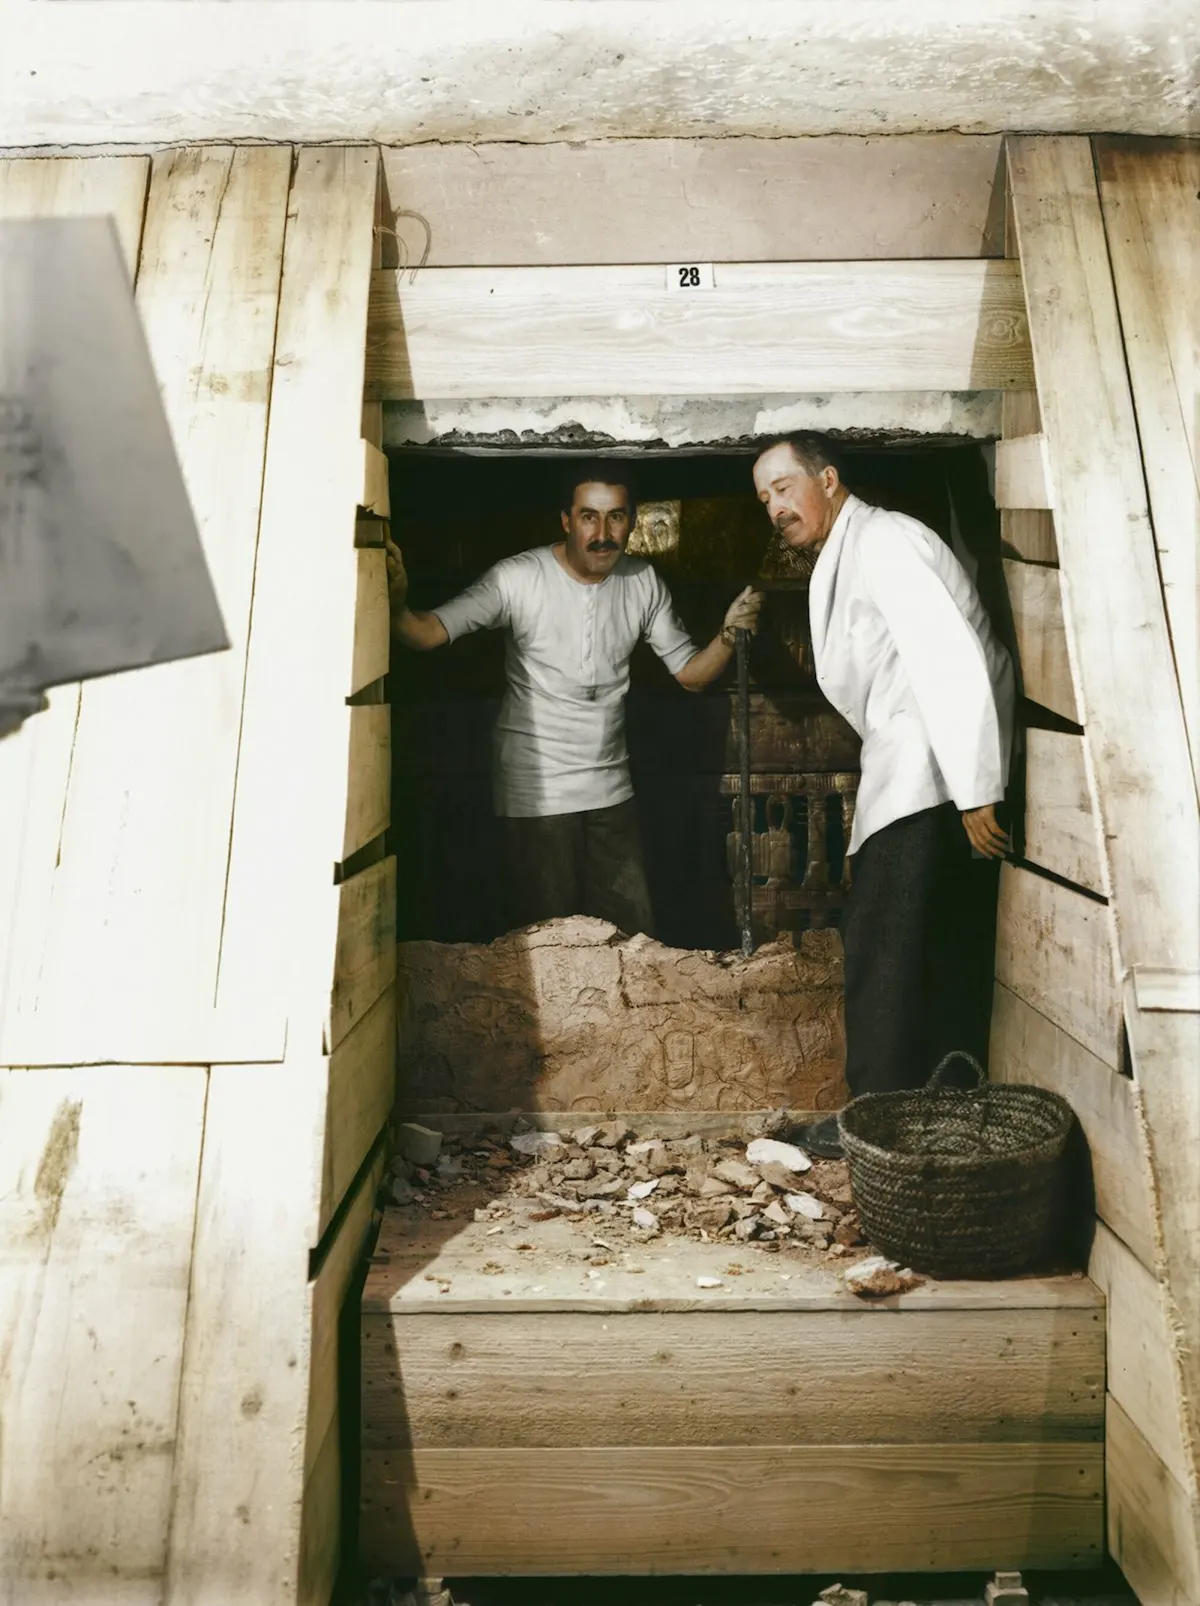 The discovery of Tutankhamun in color pictures, 1922 - Rare Historical Photos